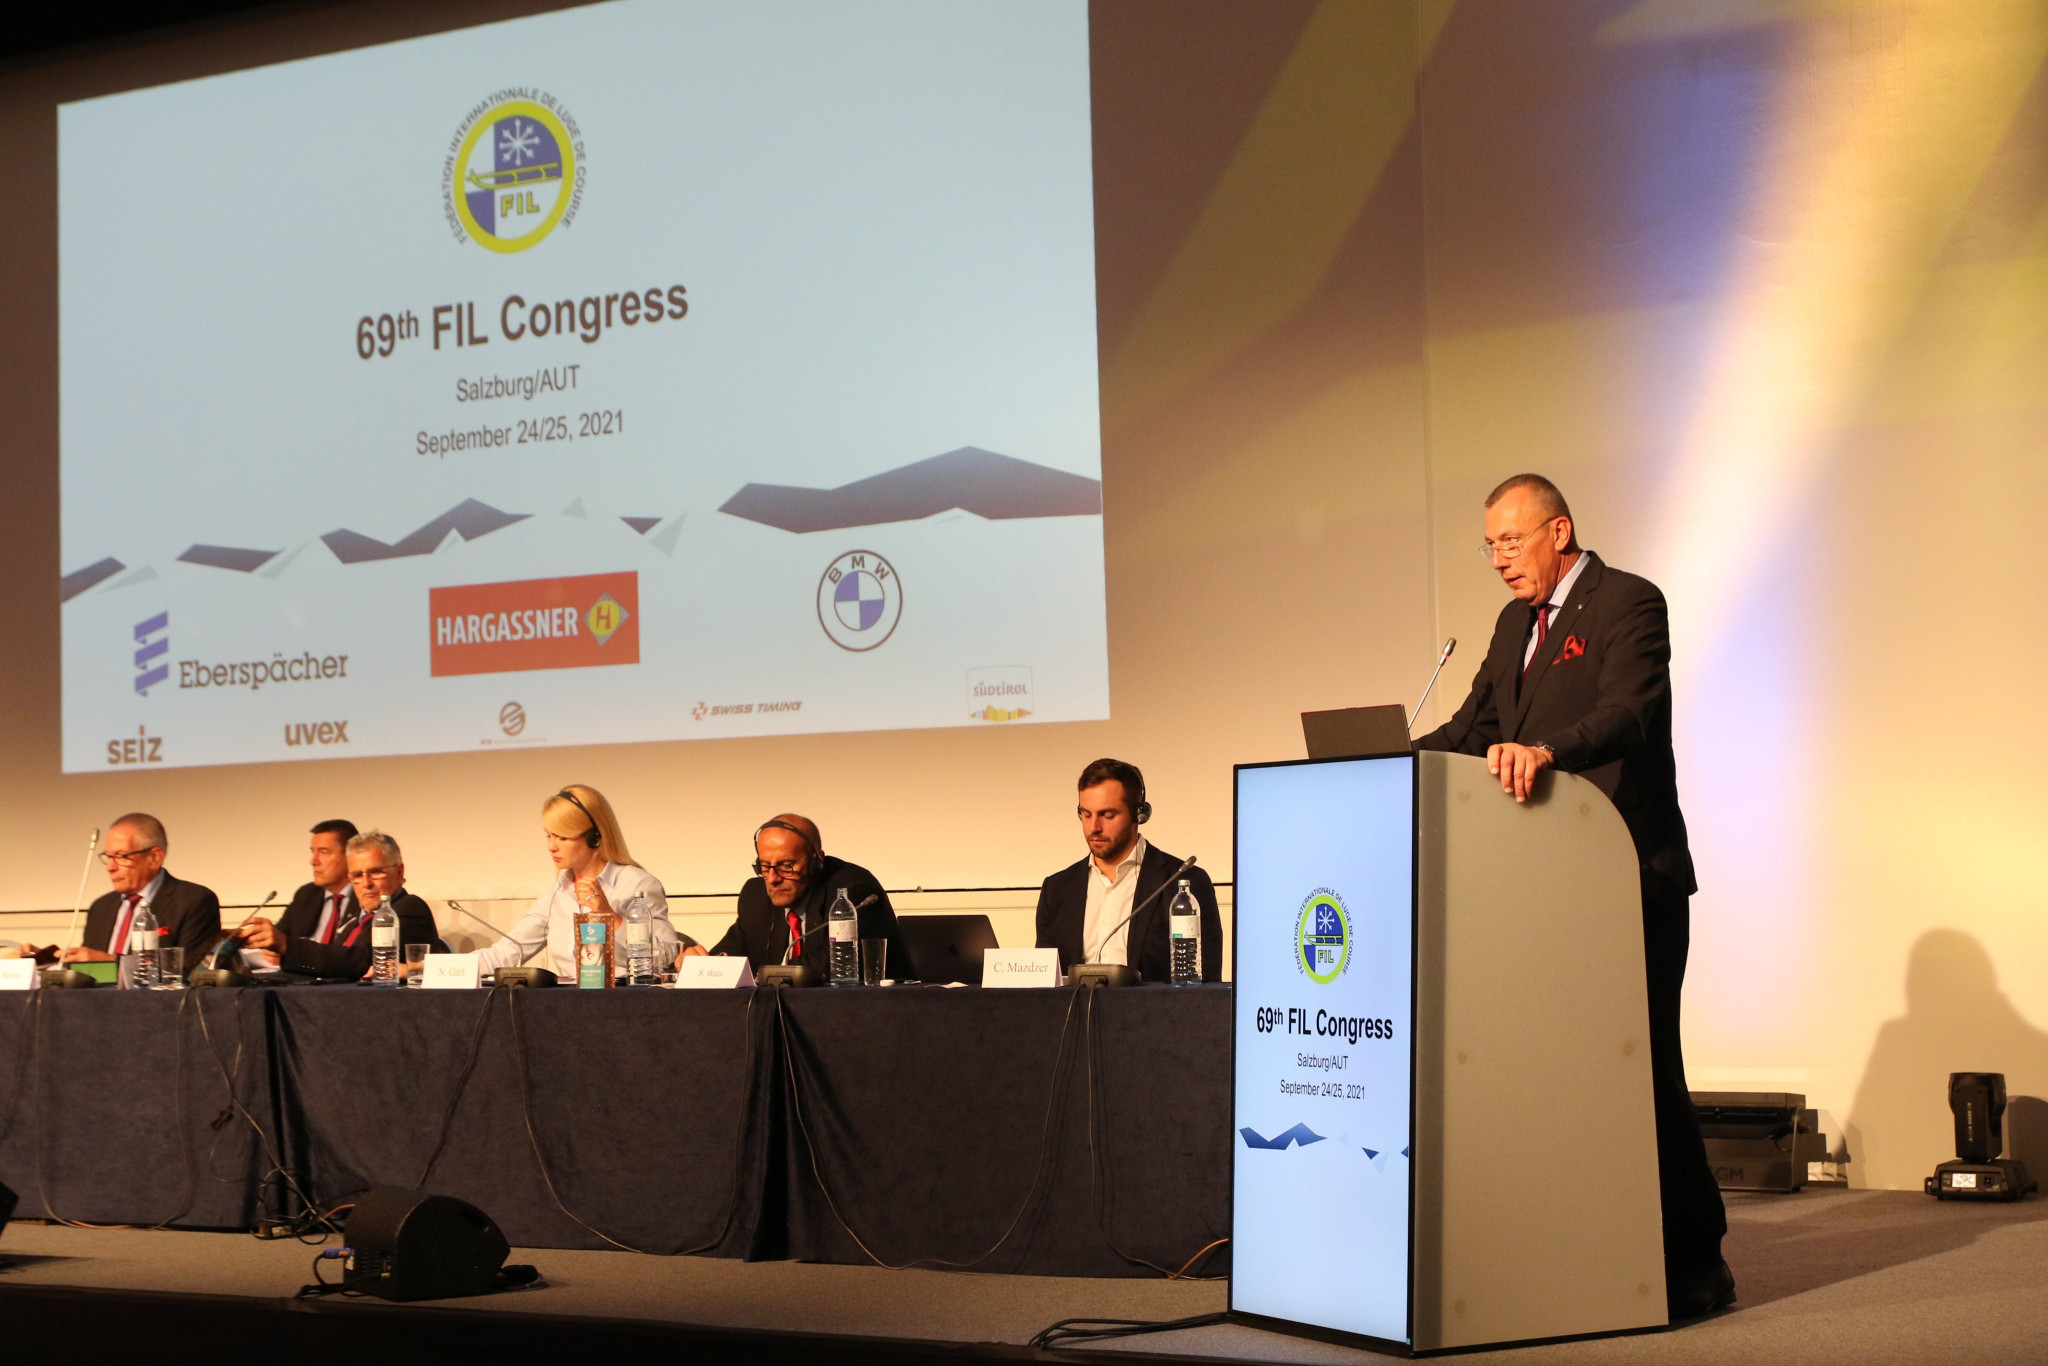 Pivotal FIL Congress in June moved from Latvia to Austria